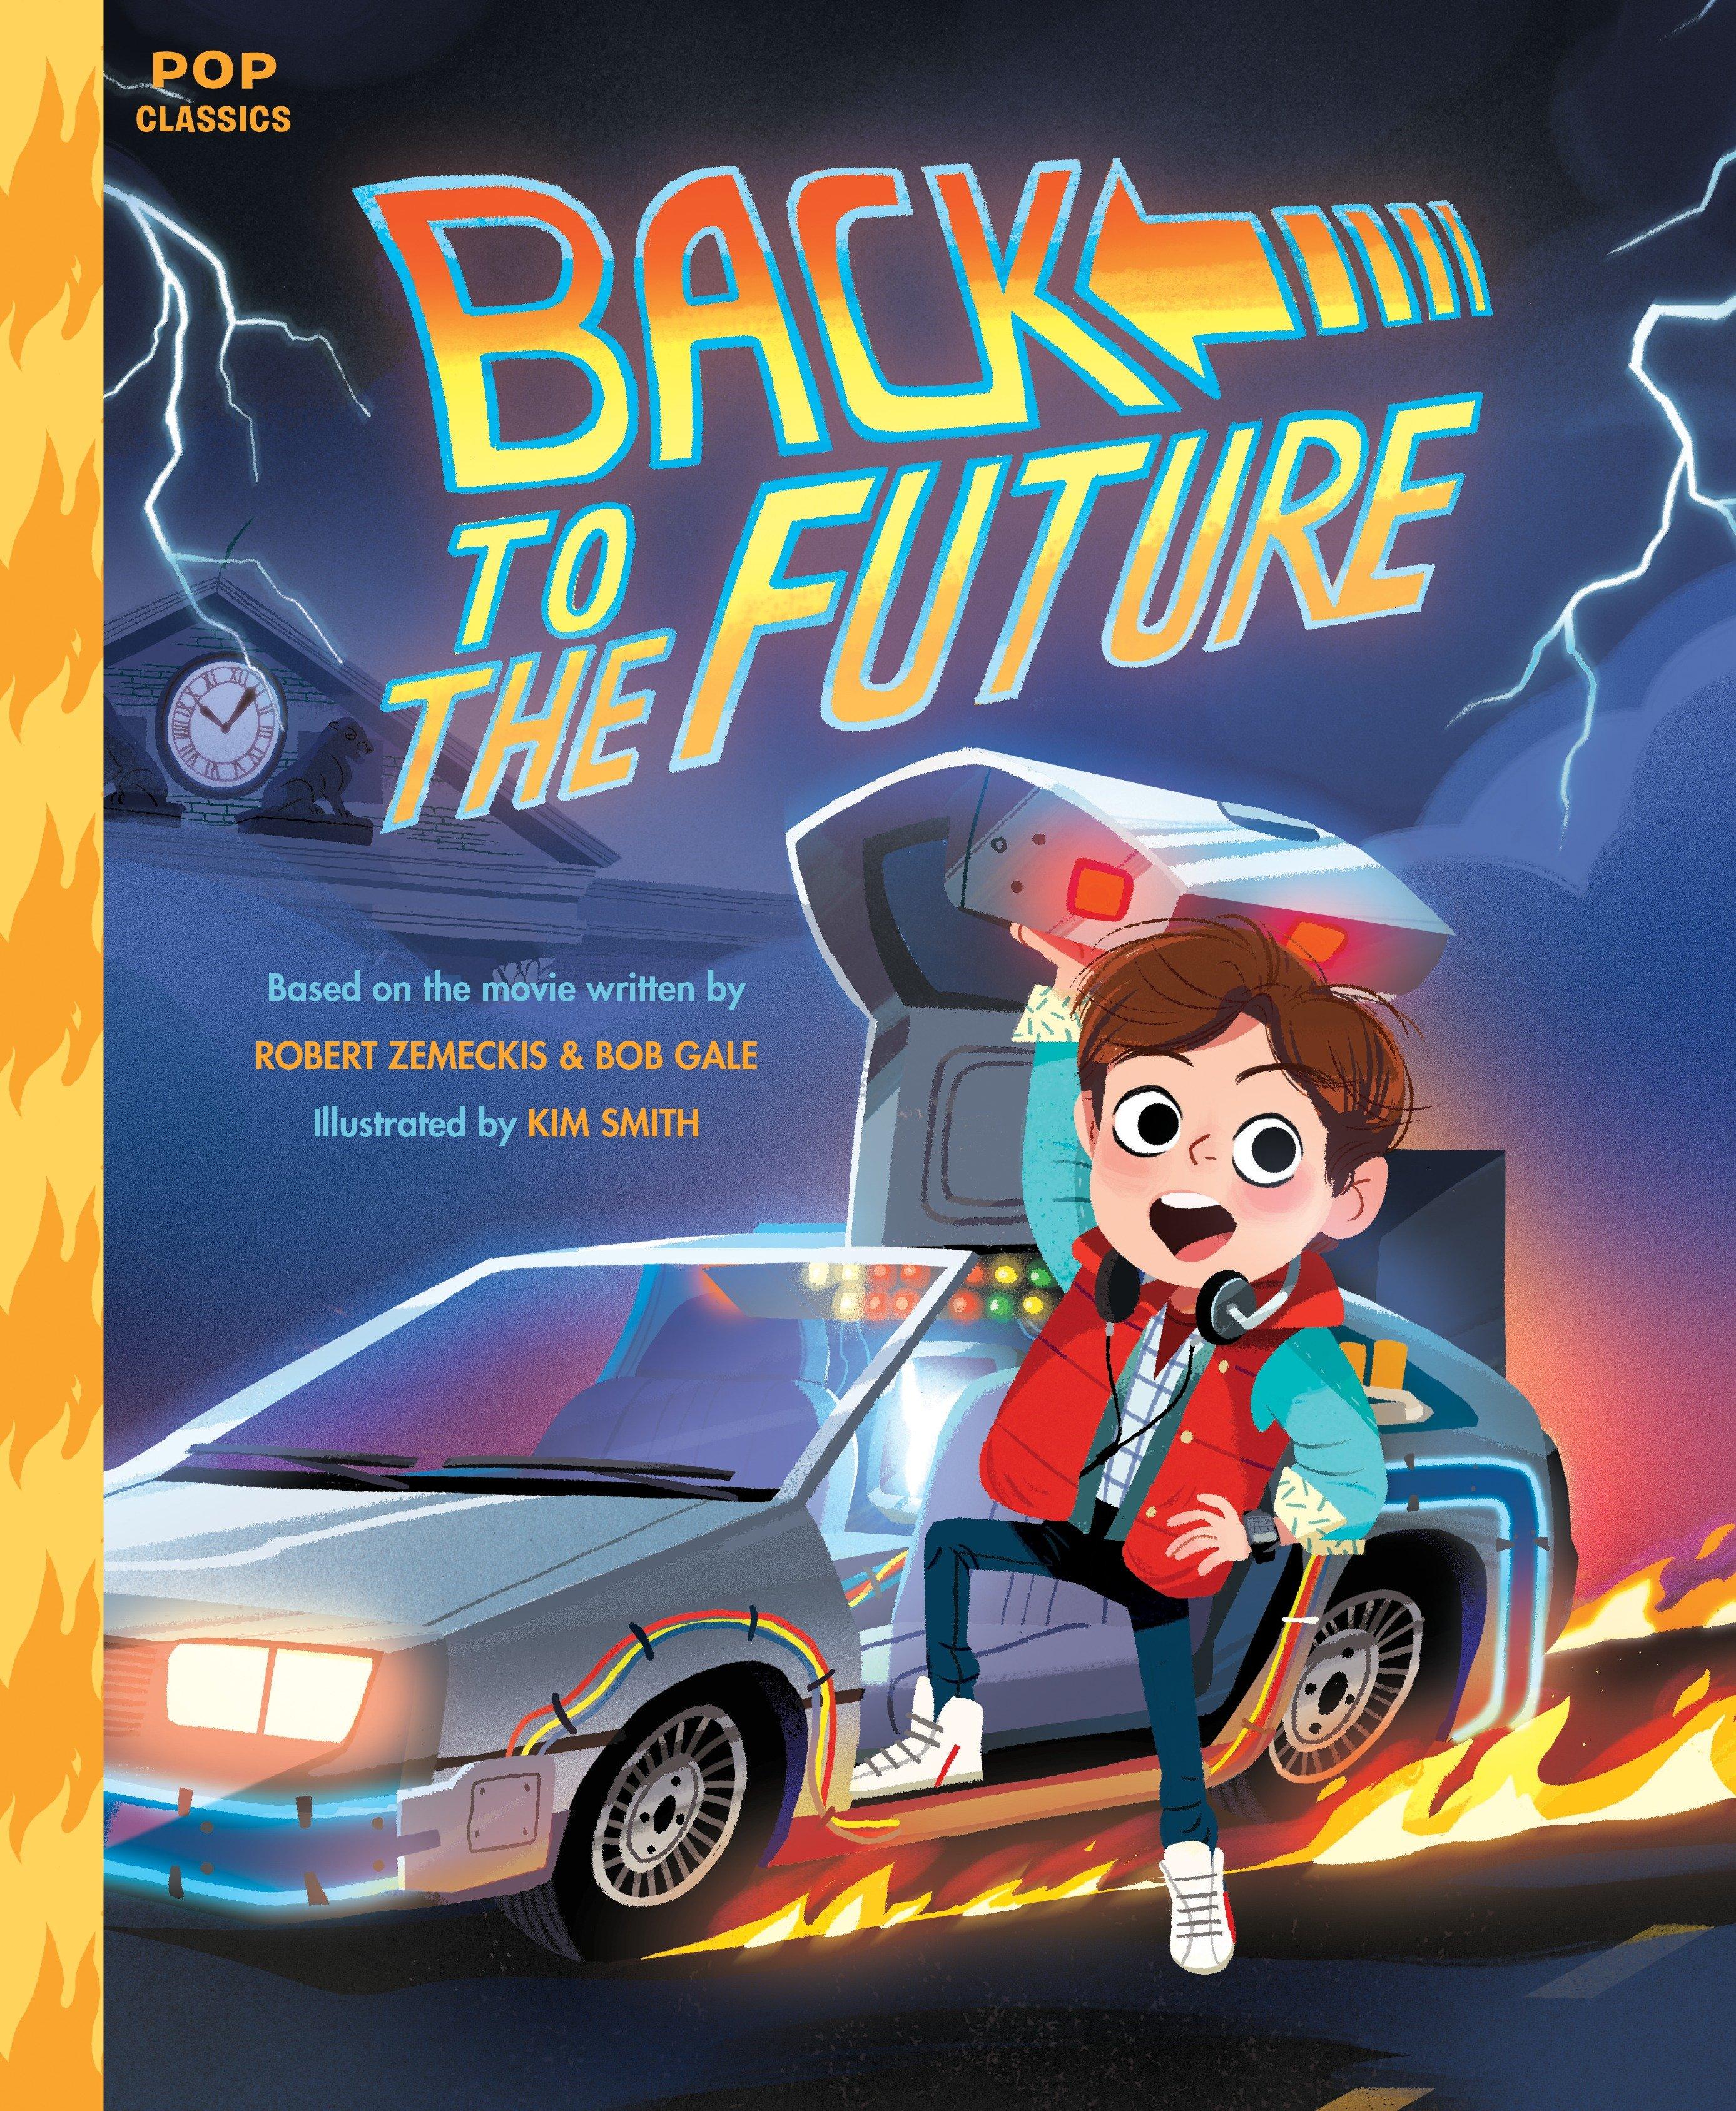 Back to the Future: The Classic Illustrated Storybook / Buch / Pop Classics / Einband - fest (Hardcover) / Englisch / 2018 / QUIRK BOOKS / EAN 9781683690238